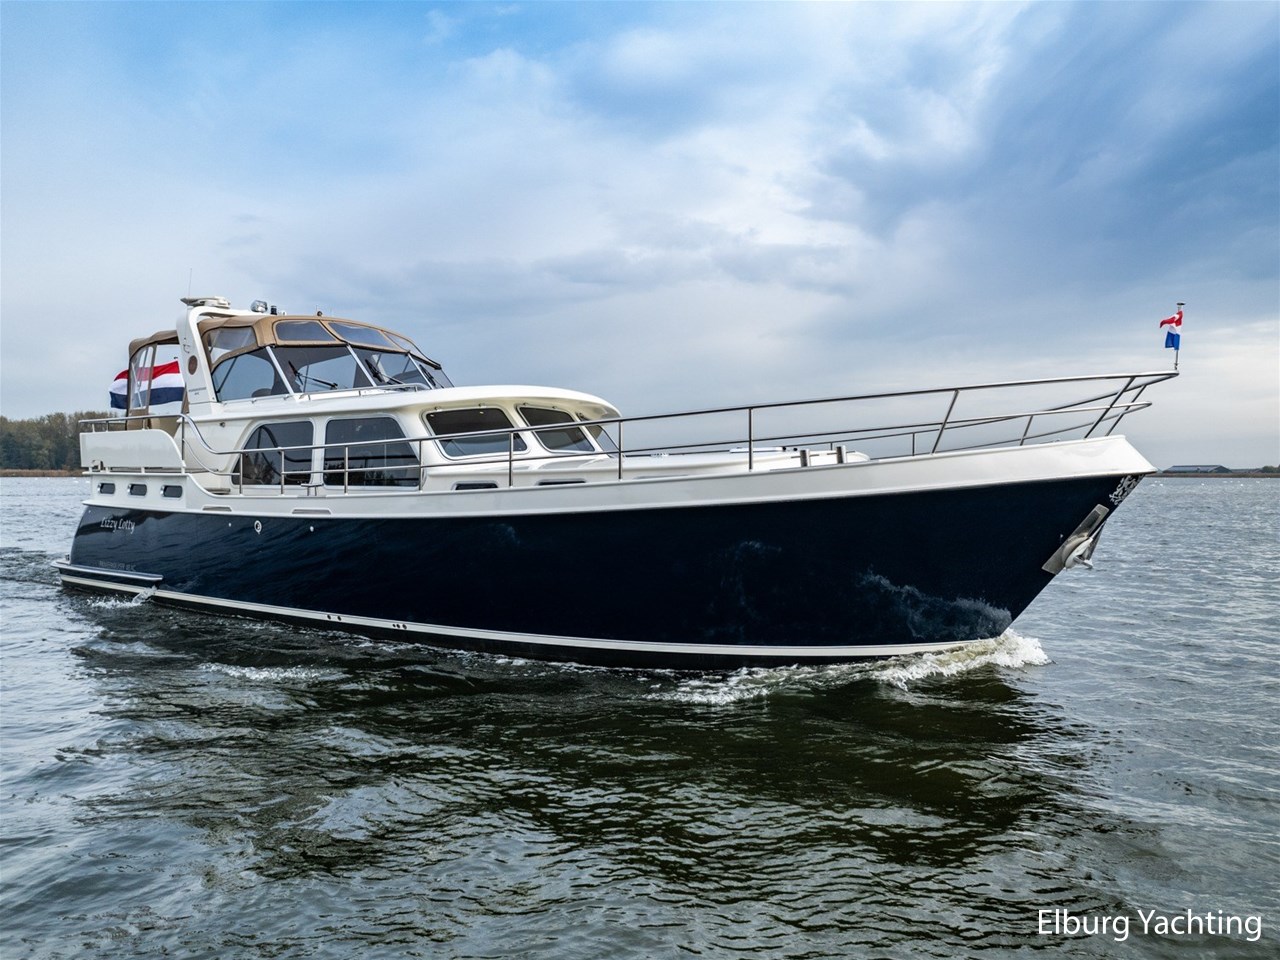 elburg yachting review